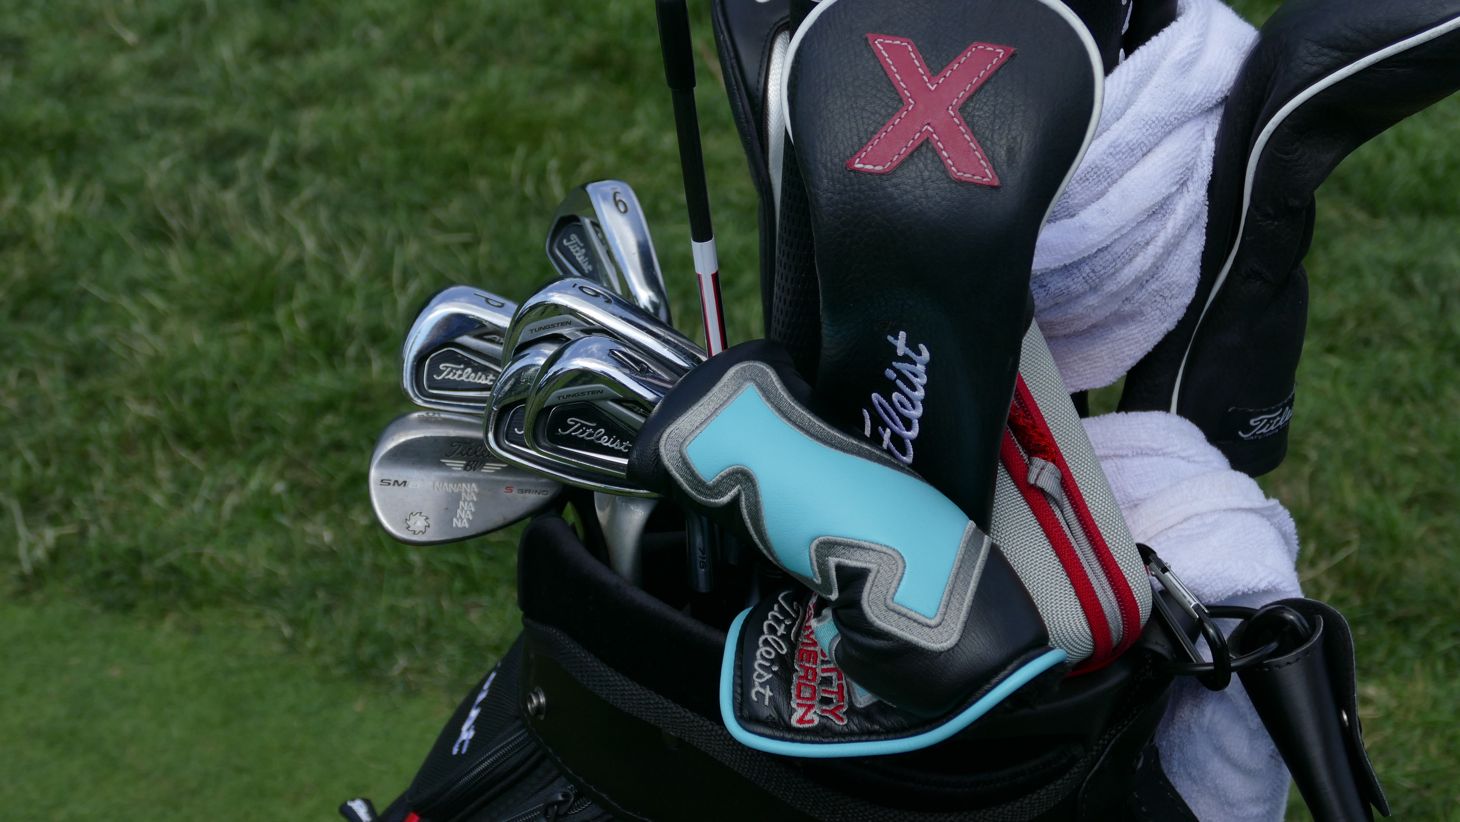 his 716 AP2 irons, along with…